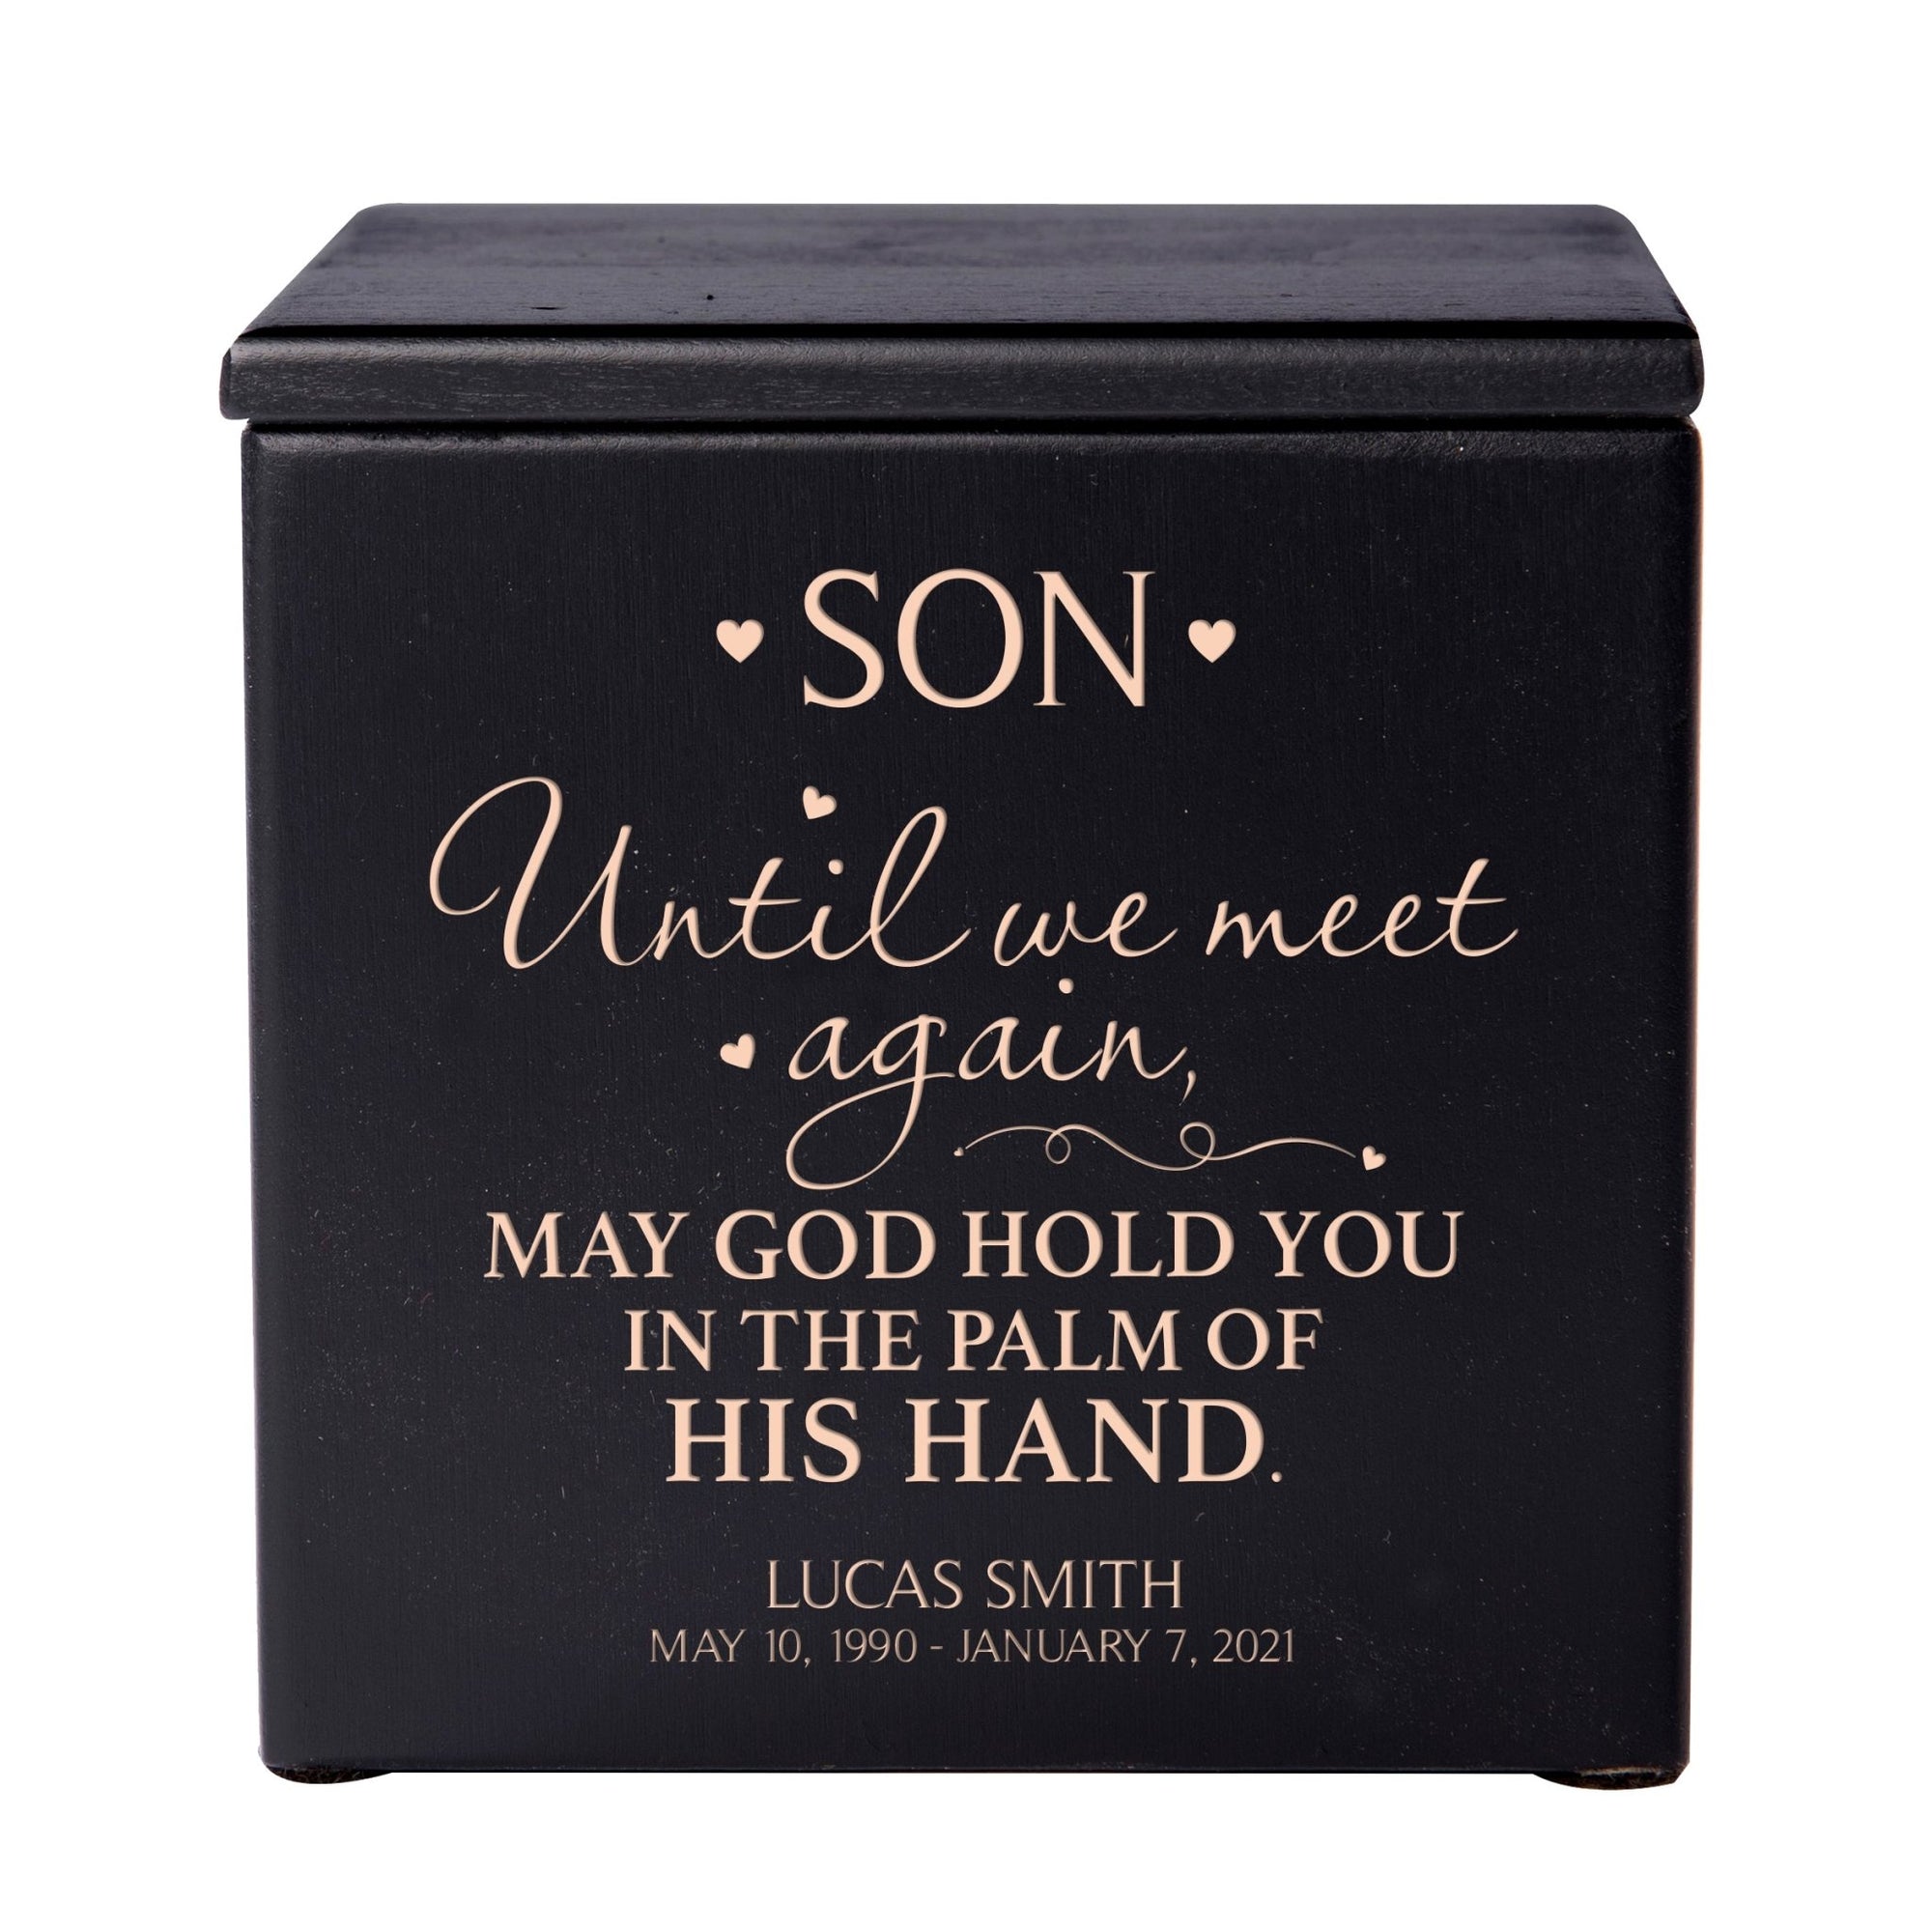 Custom Engraved Memorial 4.5x4.5in Cremation Urn Box Holds 49 Cu Inches Of Human Ashes (Until We Meet Again Son) Funeral and Condolence Keepsake - LifeSong Milestones